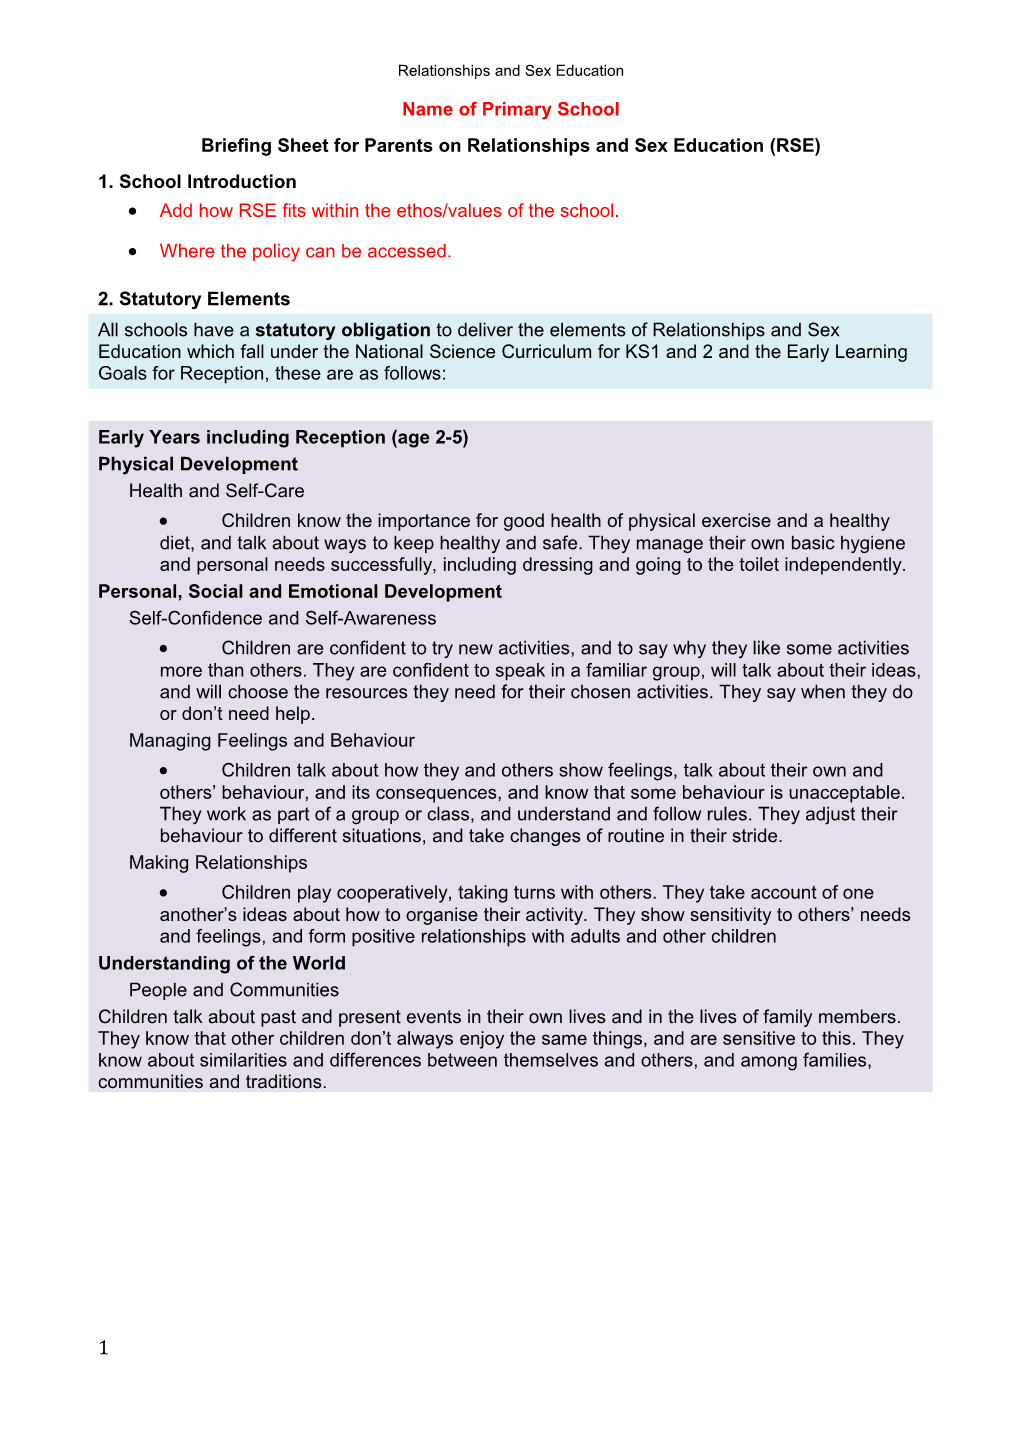 Briefing Sheet for Parents on Relationships and Sex Education (RSE)